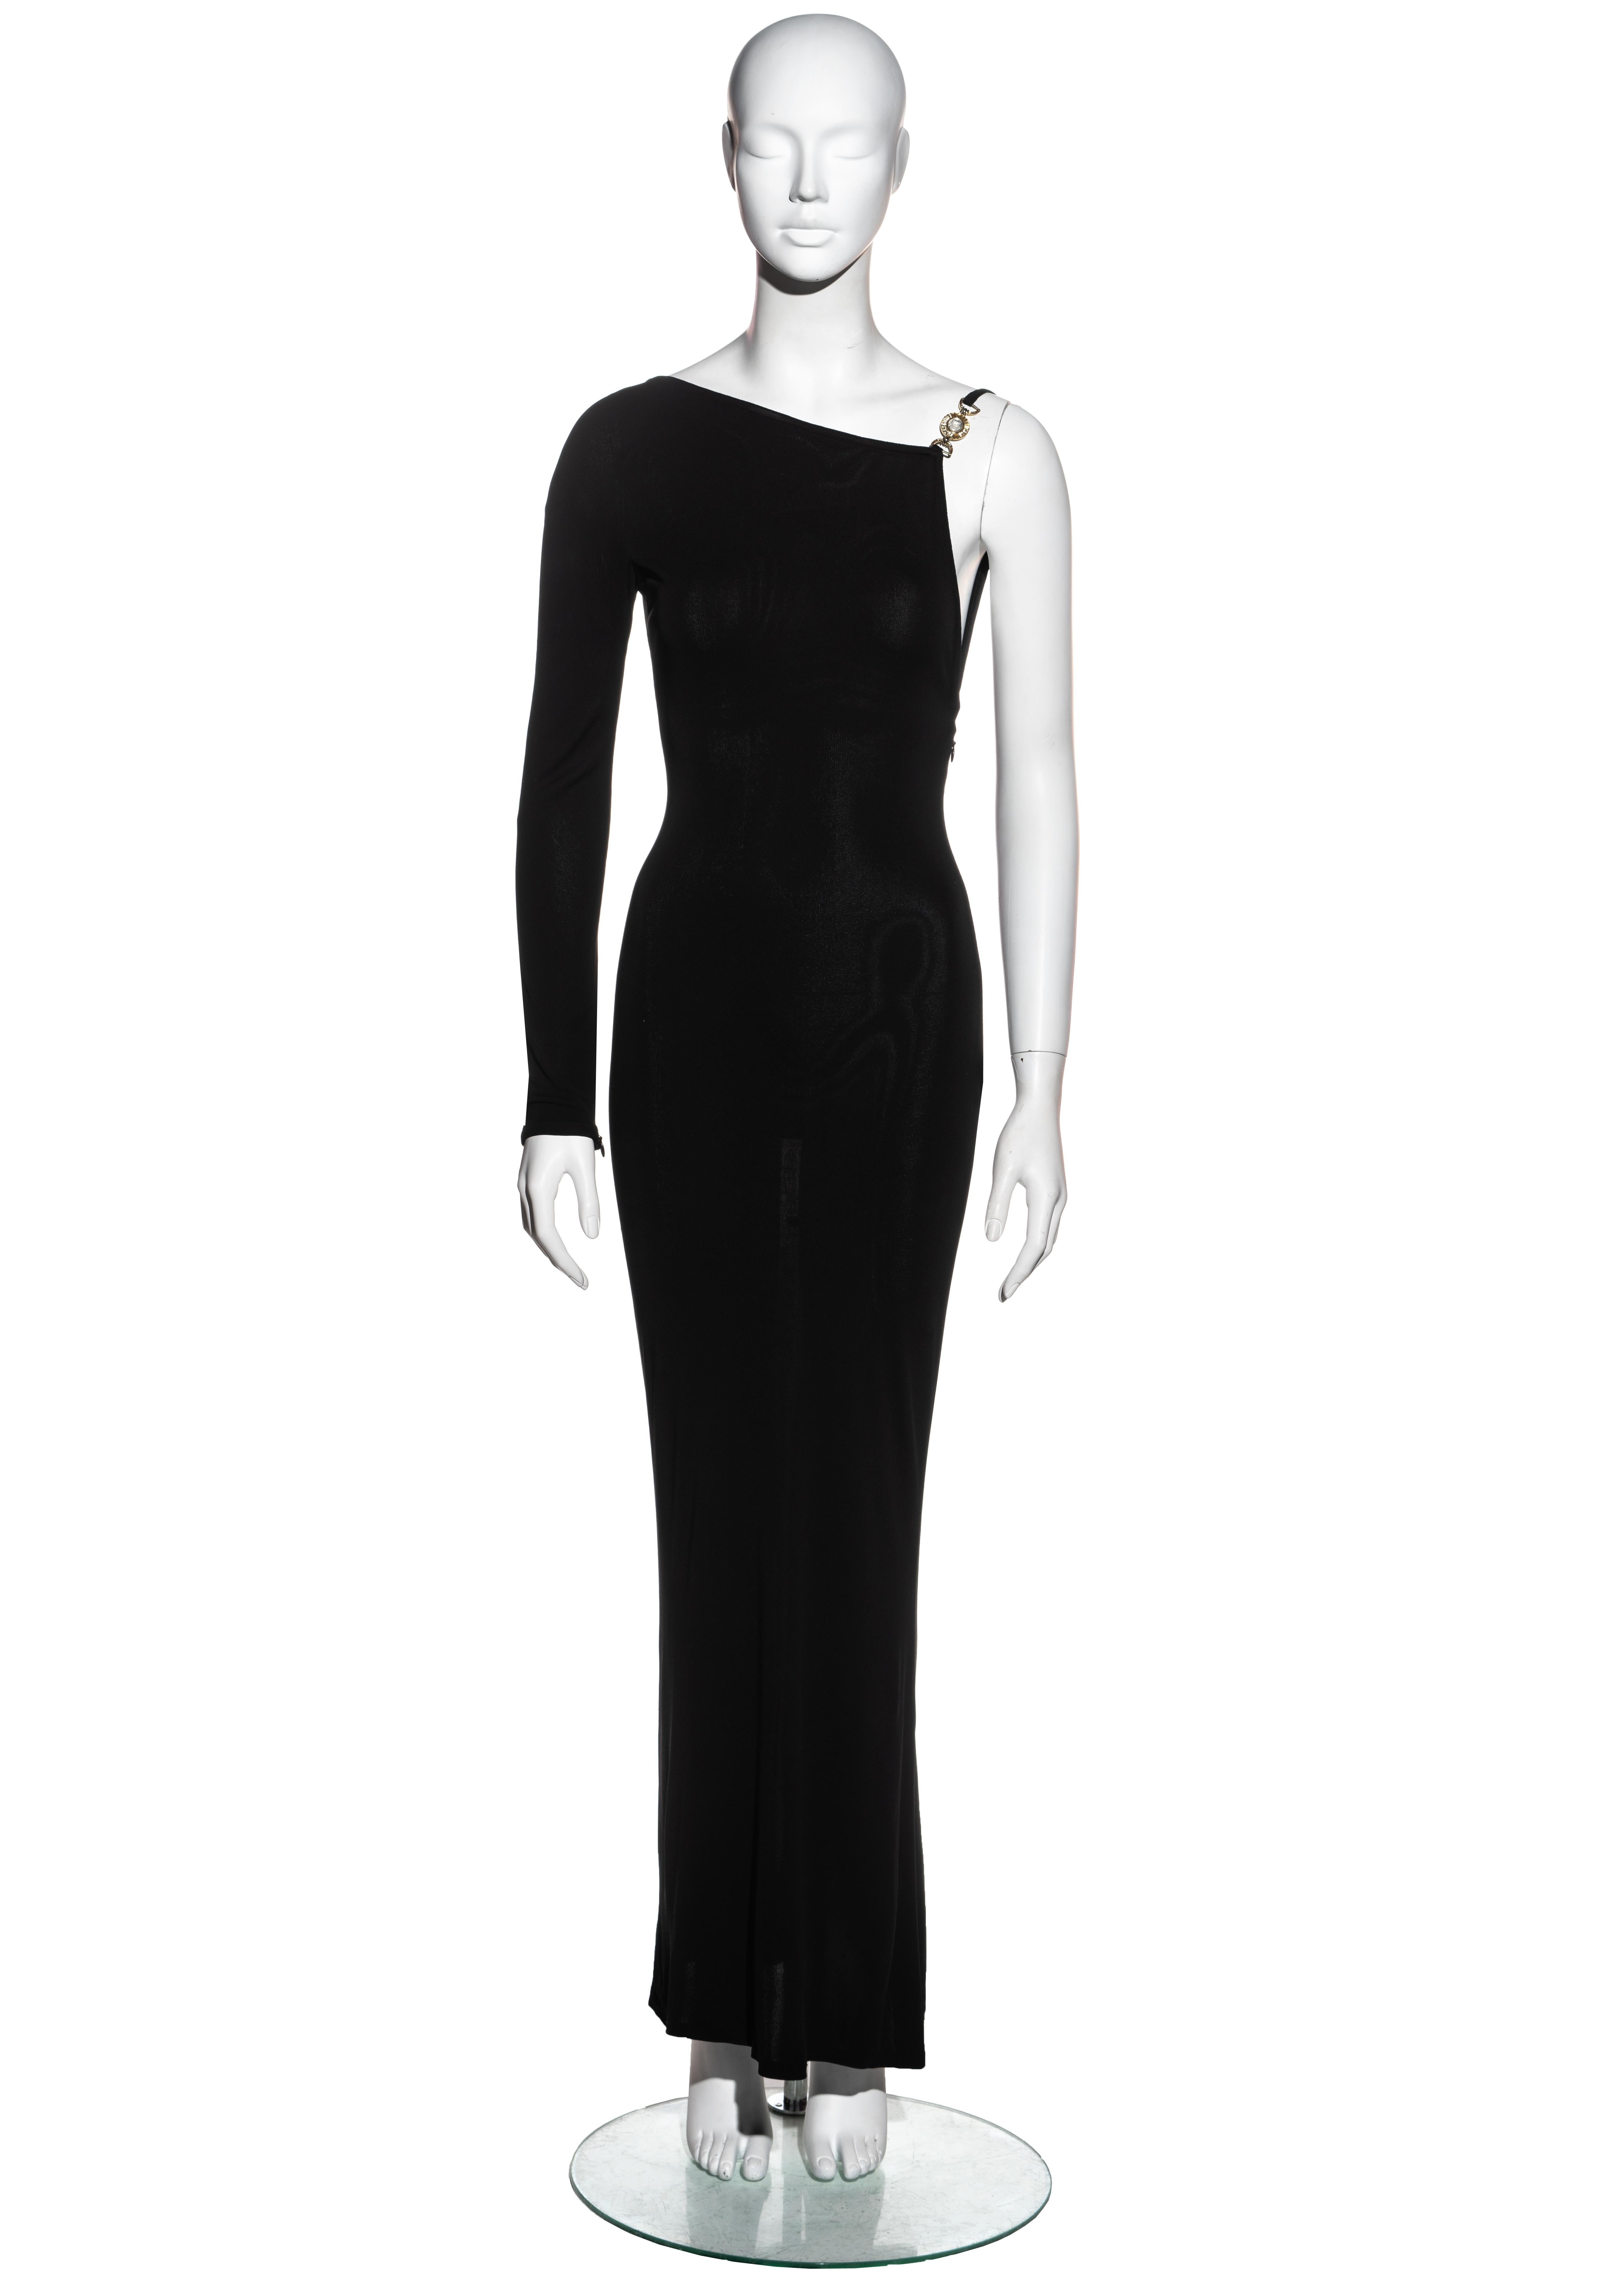 ▪ Gianni Versace black rayon jersey one-shoulder evening dress
▪ 2 gold-tone medusa coins adorned with crystals 
▪ Asymmetric neckline 
▪ Boning on bodice 
▪ Concealed zip fastening 
▪ IT 42 - FR 38 - UK 10 - US 6
▪ Fall-Winter 1996